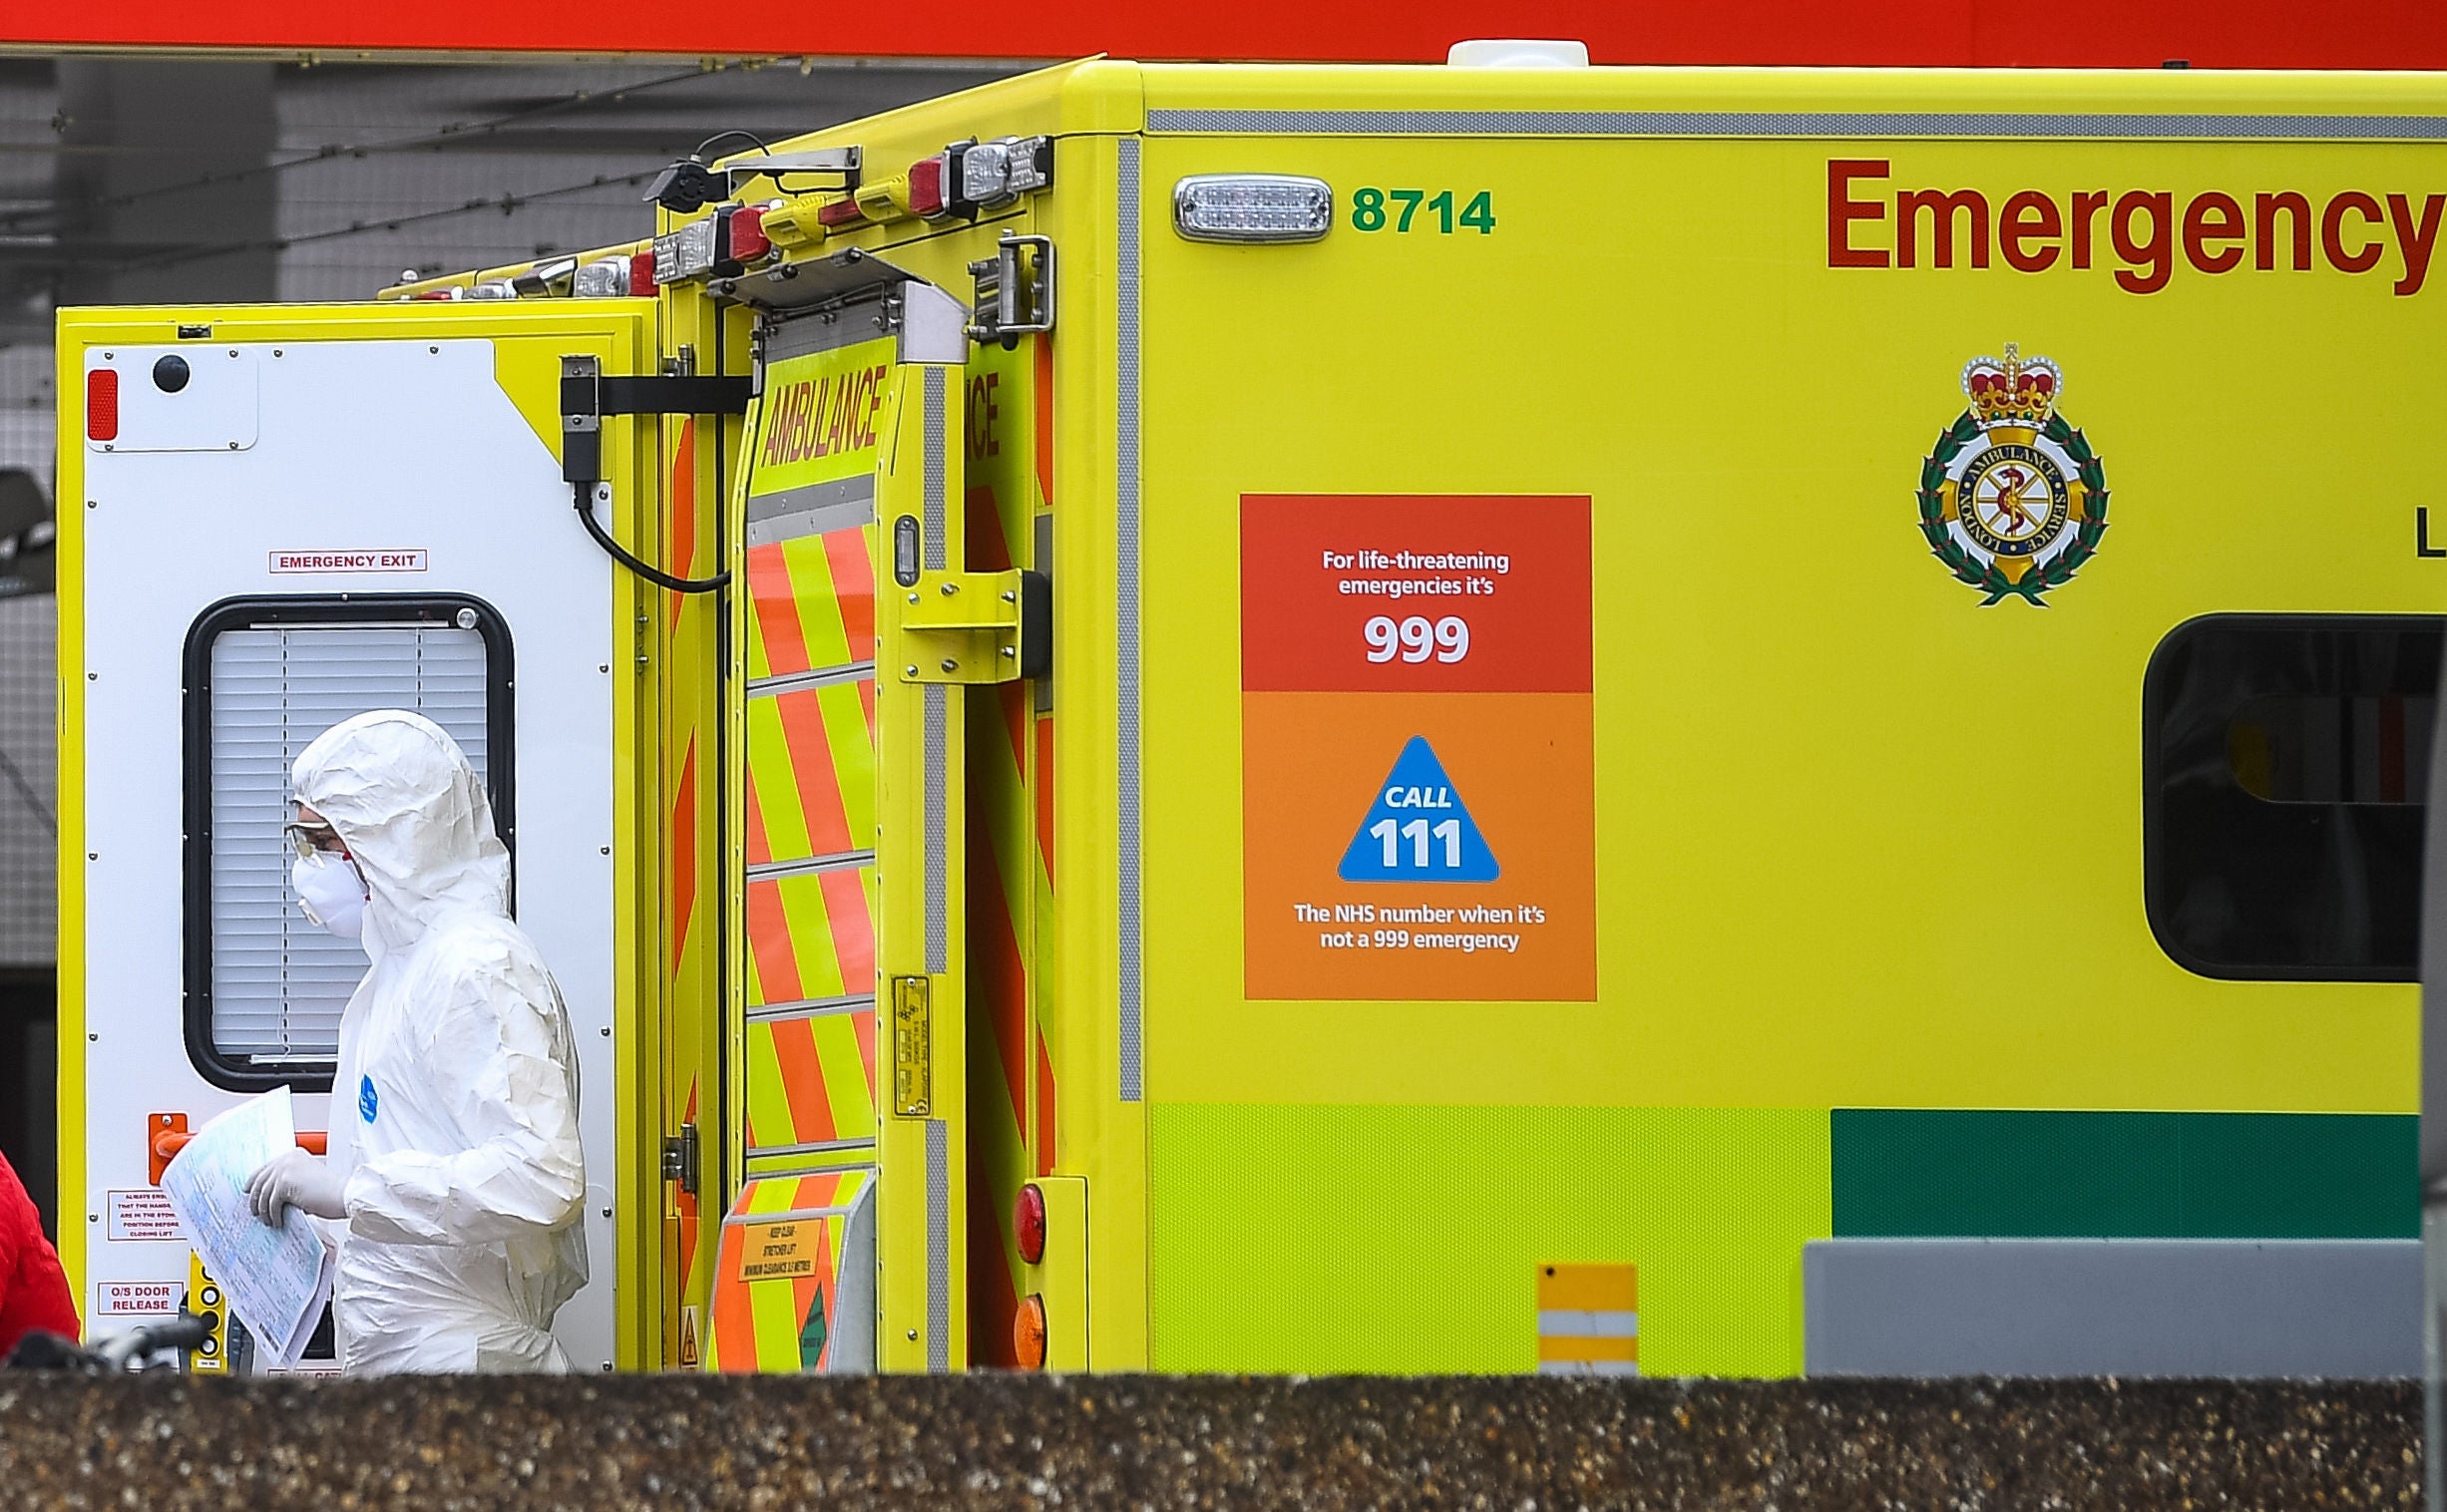 An NHS paramedic wearing personal protective equipment